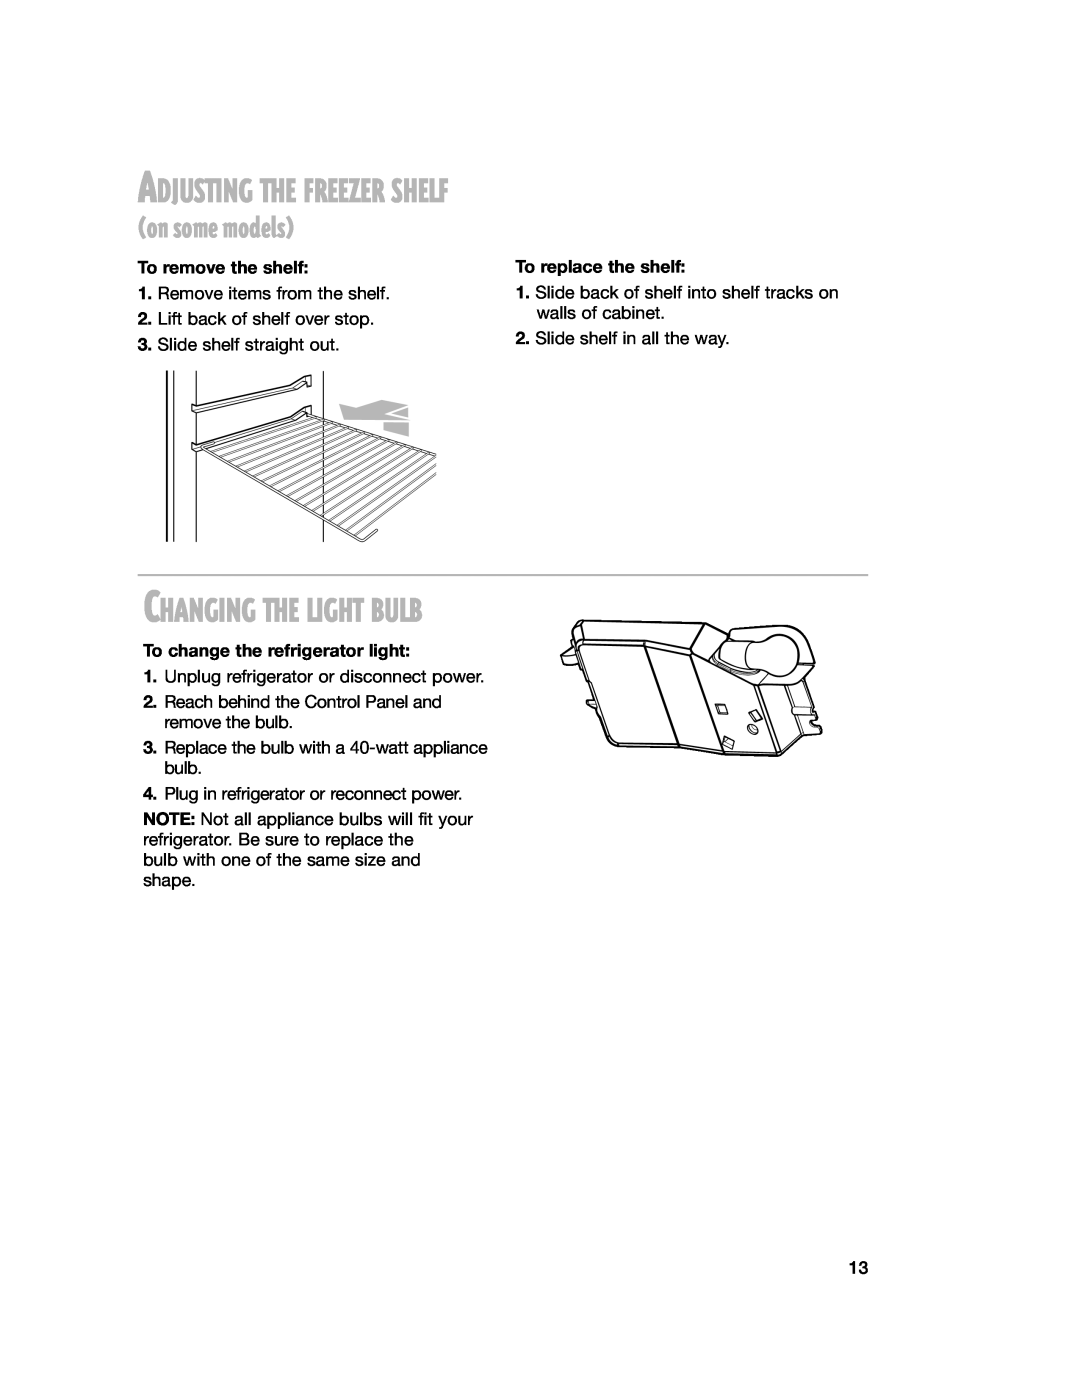 Whirlpool 2201959 manual Changing The Light Bulb, Adjusting The Freezer Shelf, To remove the shelf, To replace the shelf 